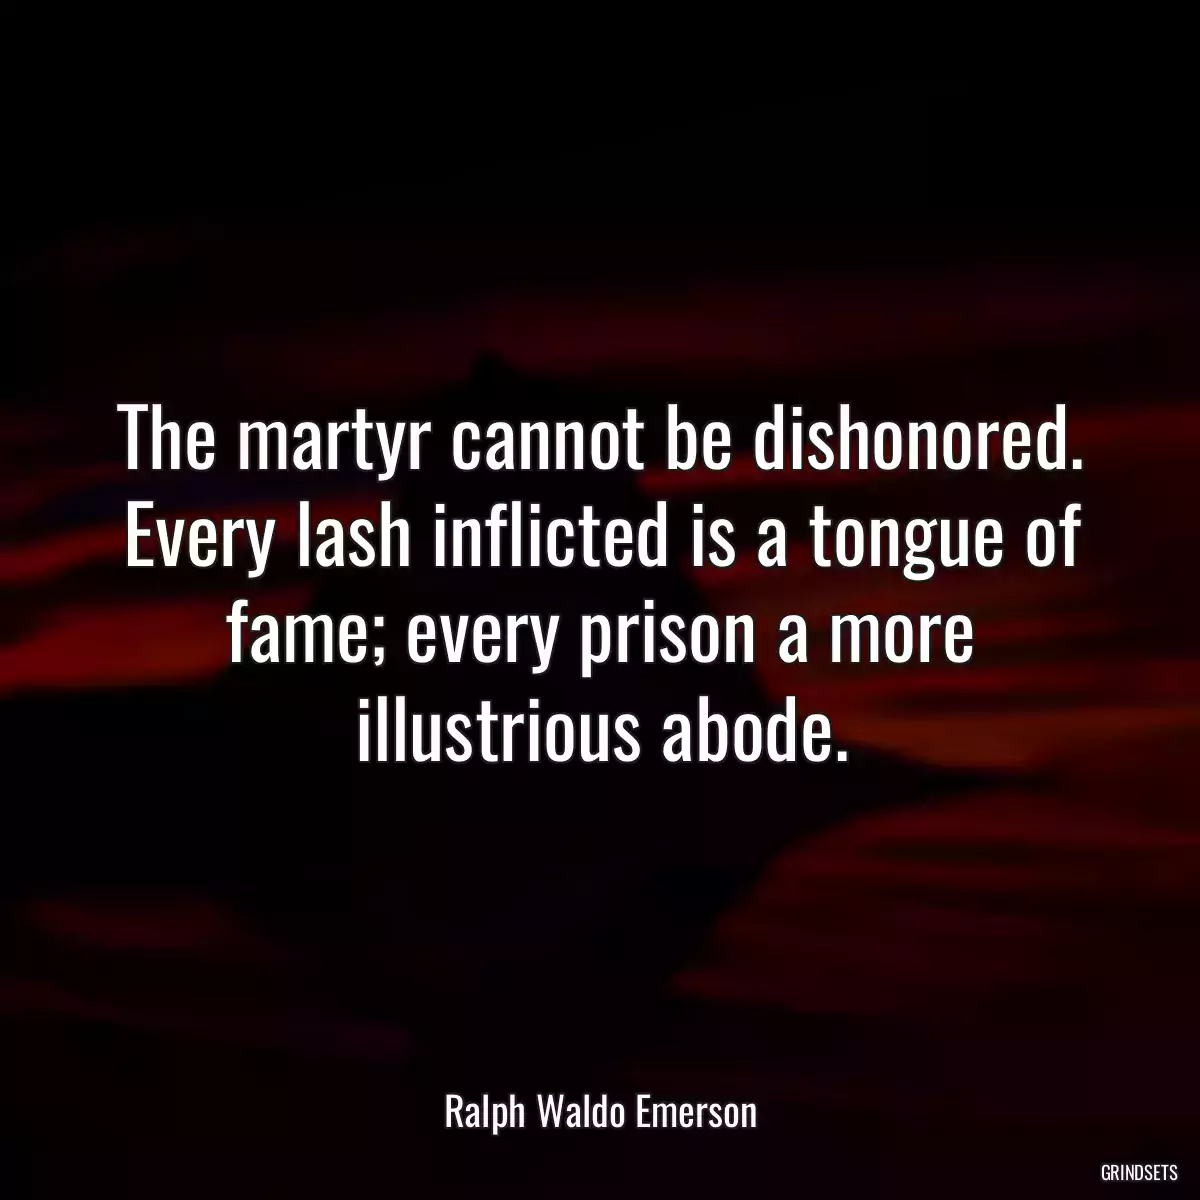 The martyr cannot be dishonored. Every lash inflicted is a tongue of fame; every prison a more illustrious abode.